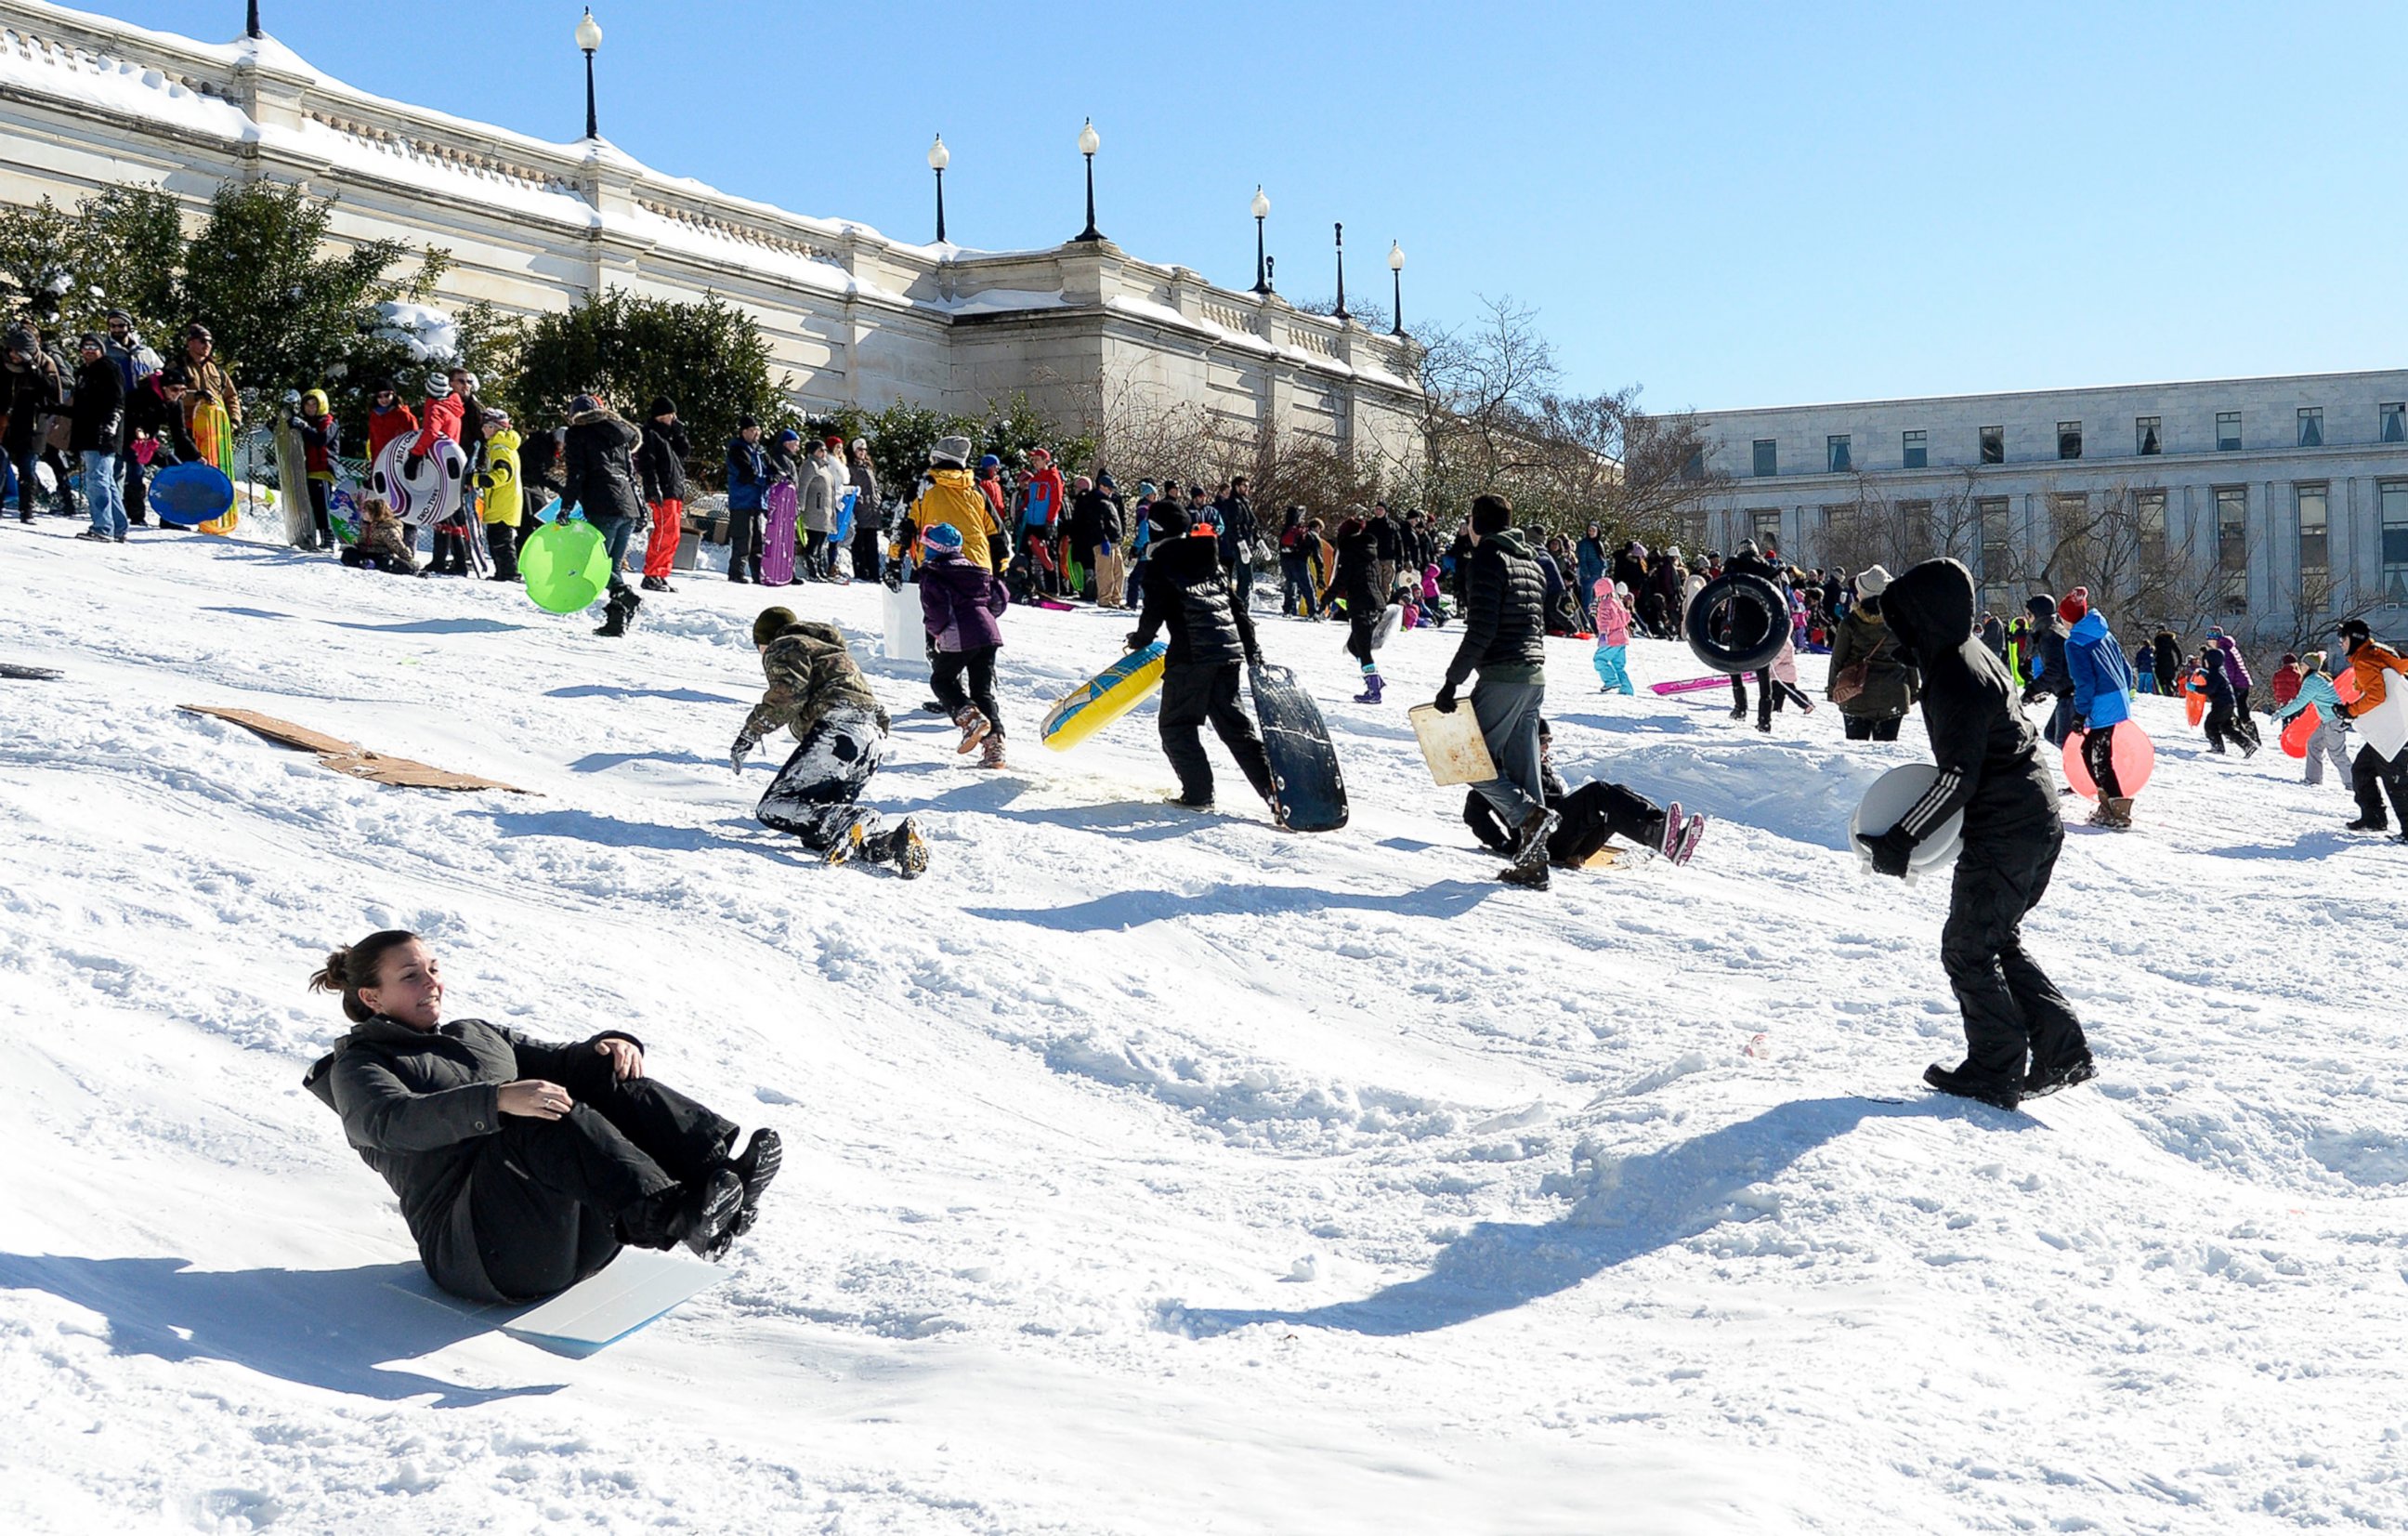 PHOTO: People are sliding on the West Lawn of the U.S. Capitol, Jan. 24, 2016 in Washington.